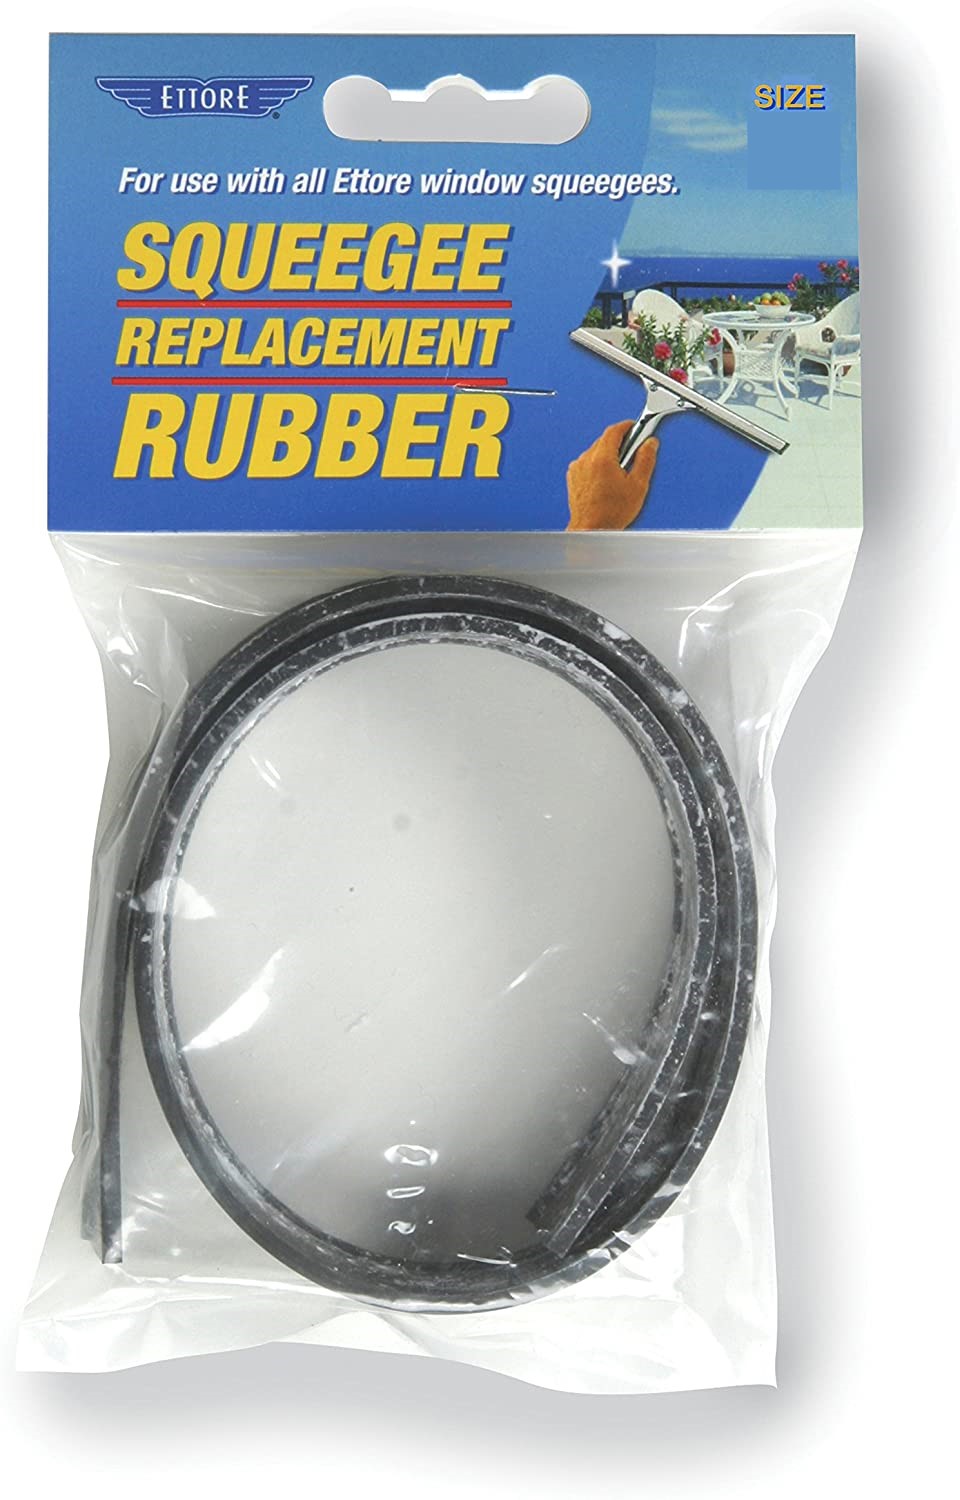 ET REPLACEMENT SQUEEGEE RUBBER 18